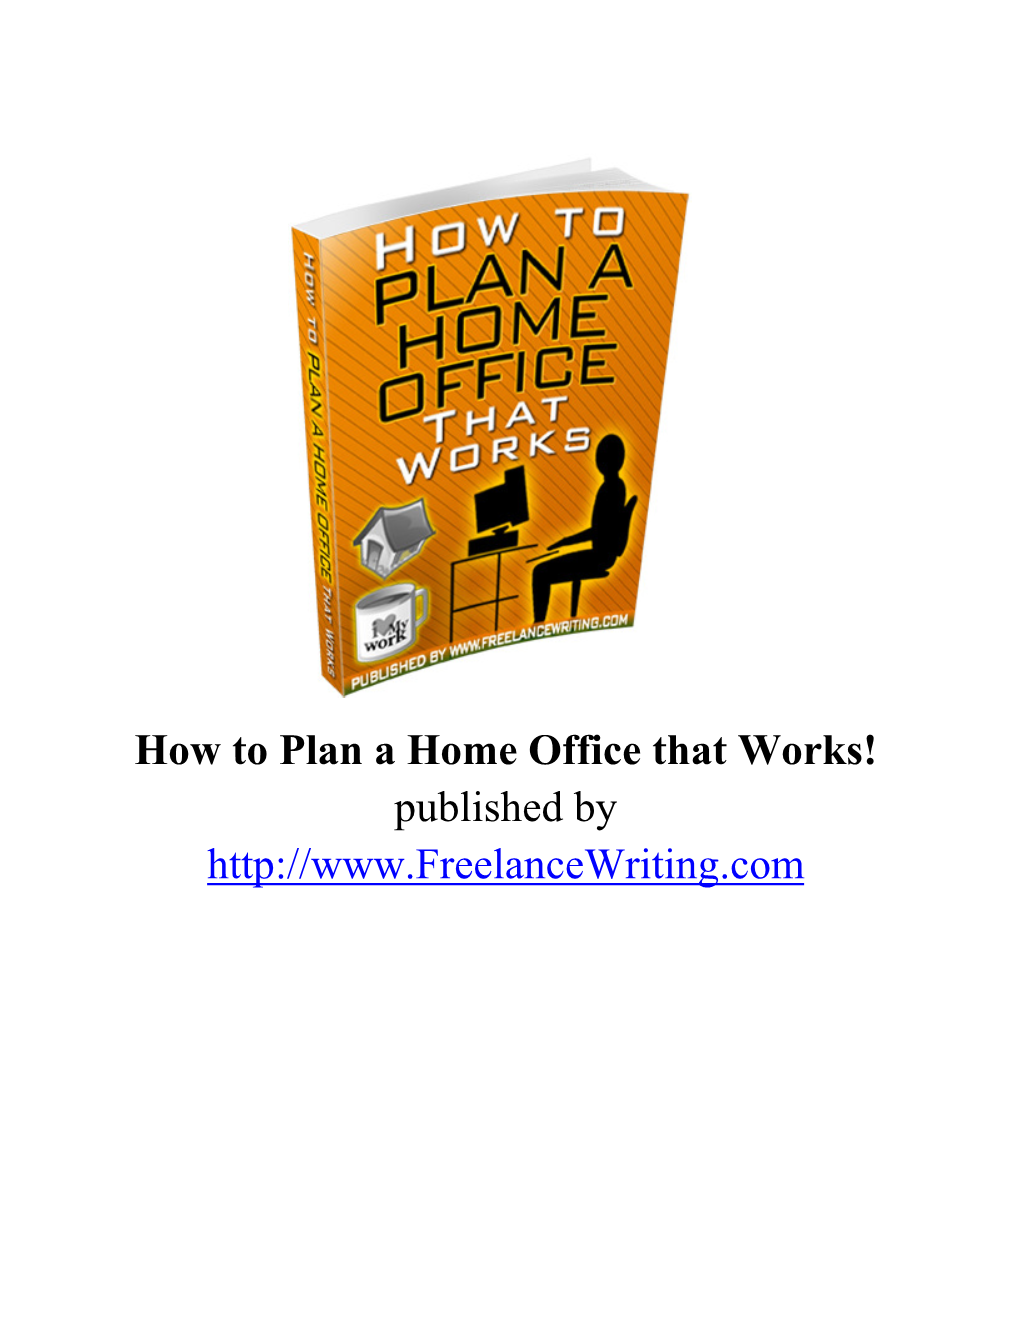 How to Plan a Home Office That Works! Published By